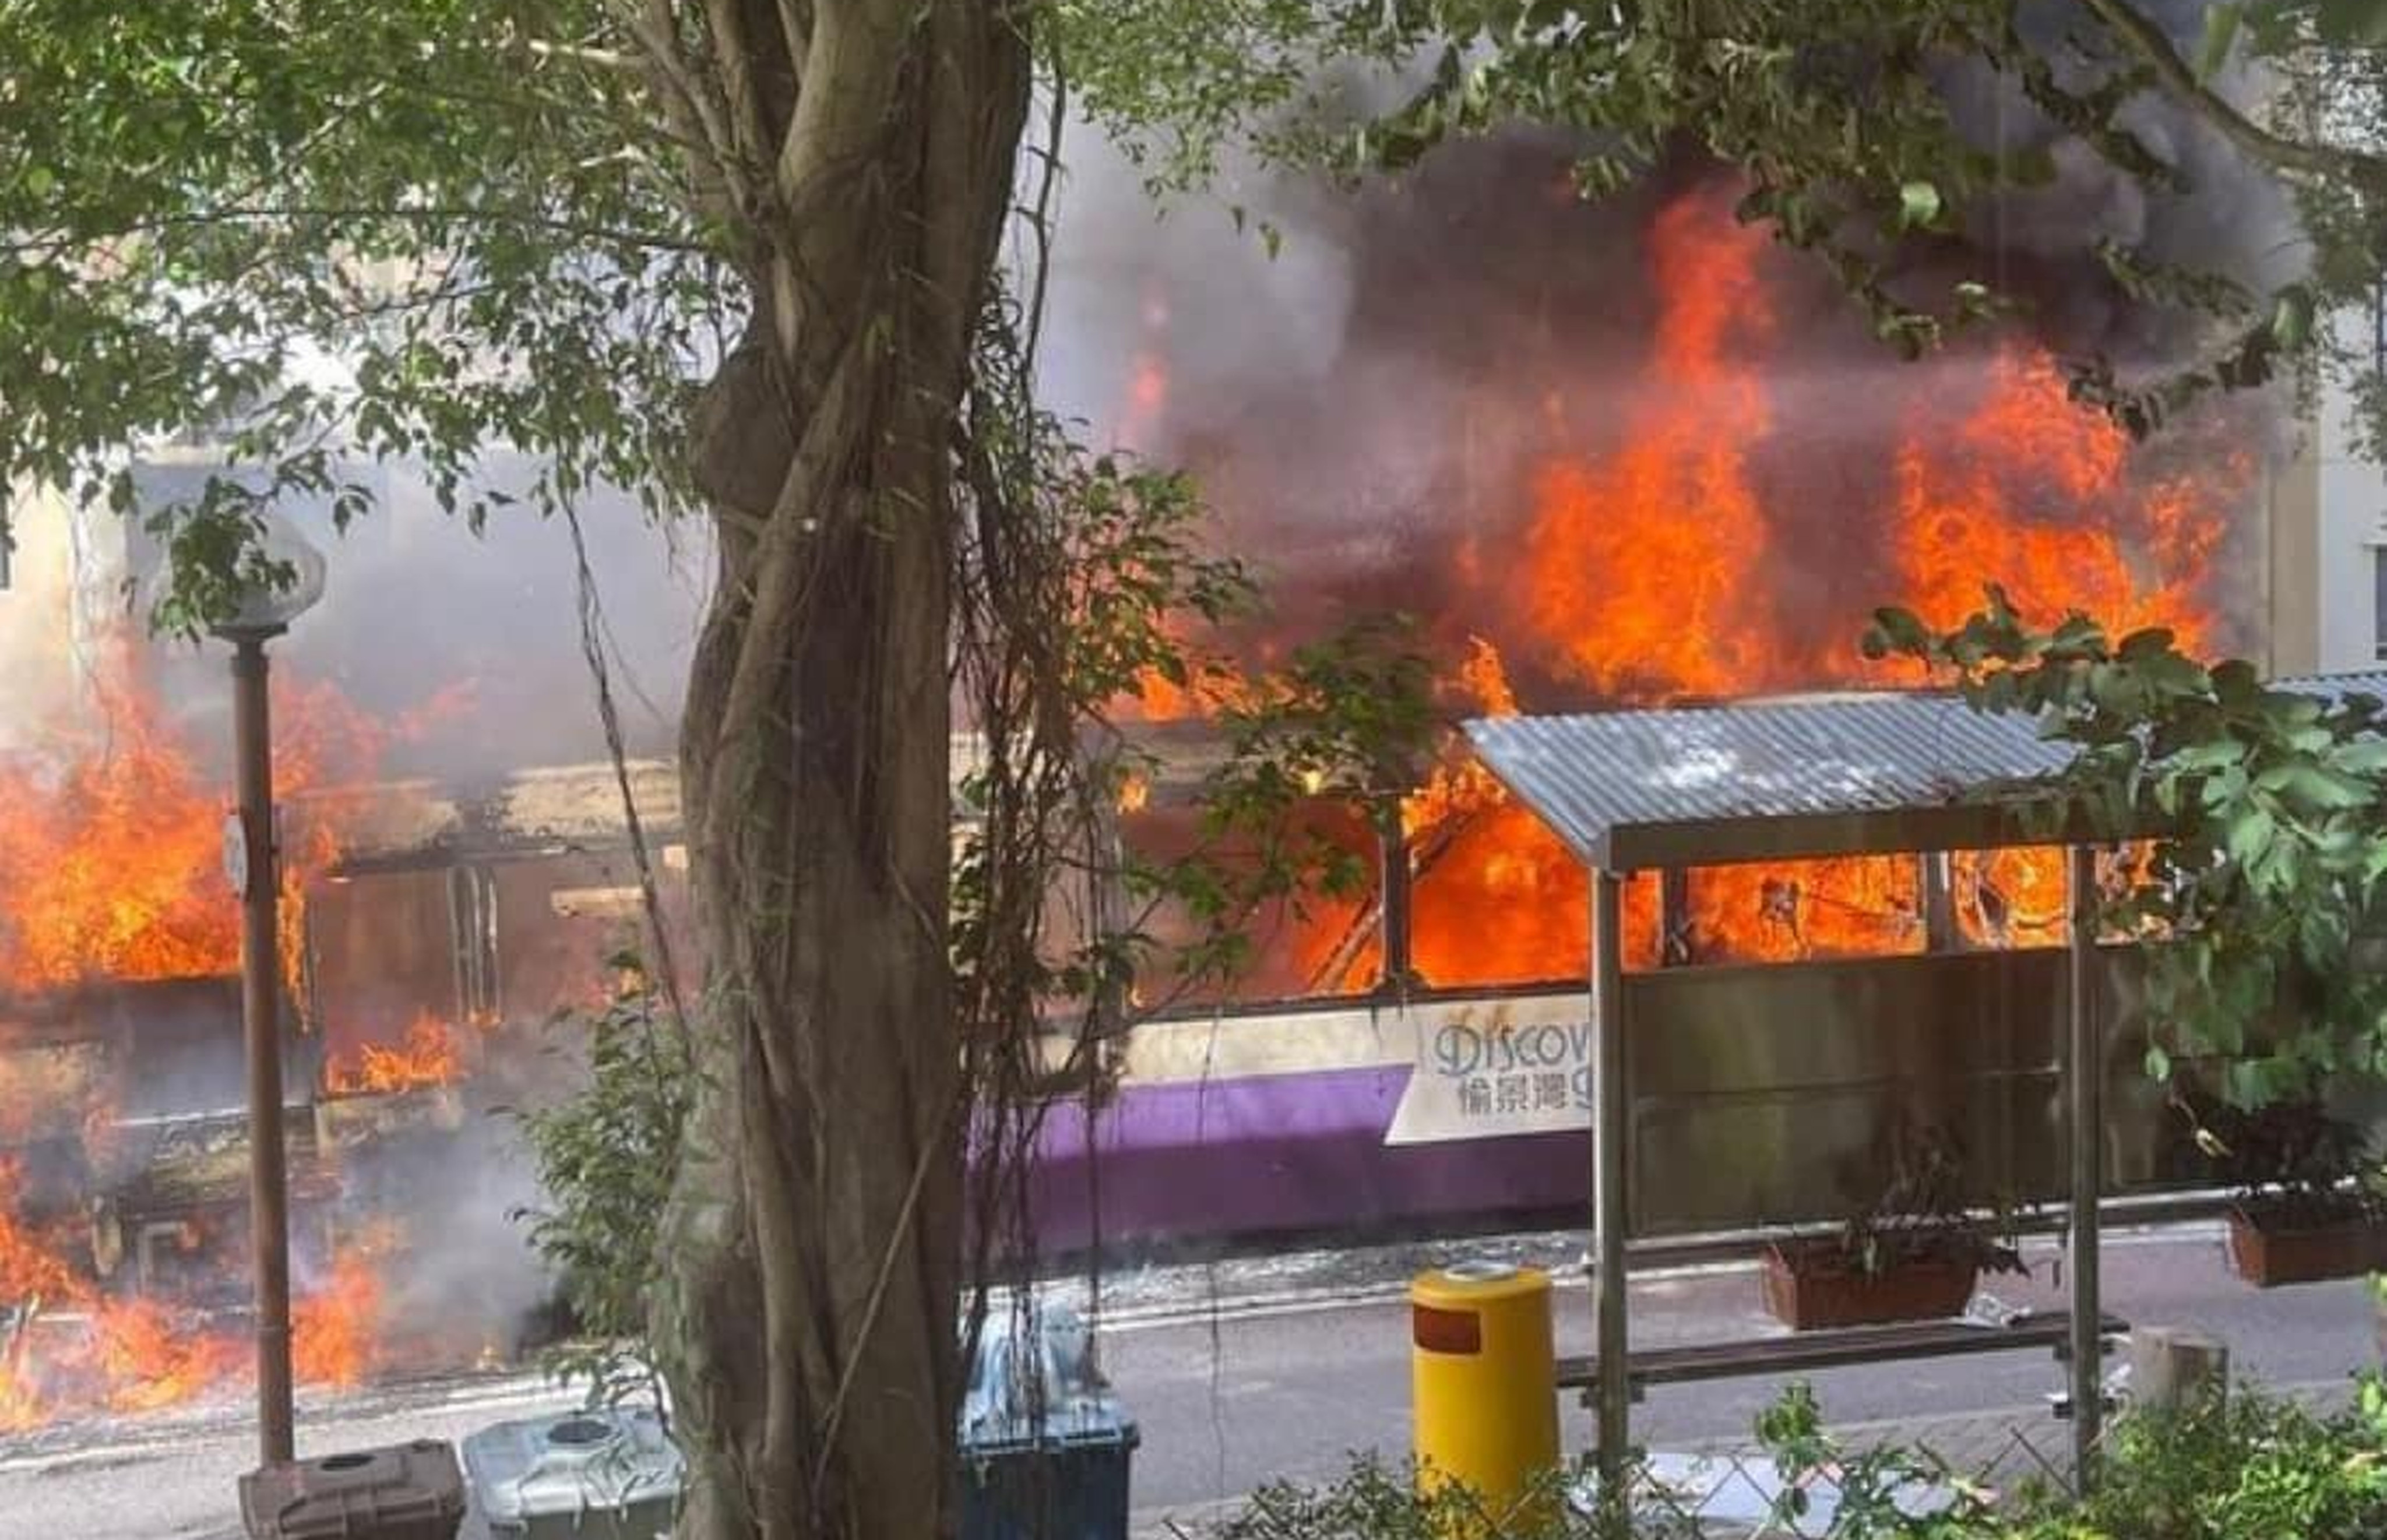 A bus burst into flames outside Peninsula Village in Discovery Bay on Friday. Photo: Brandon Wong